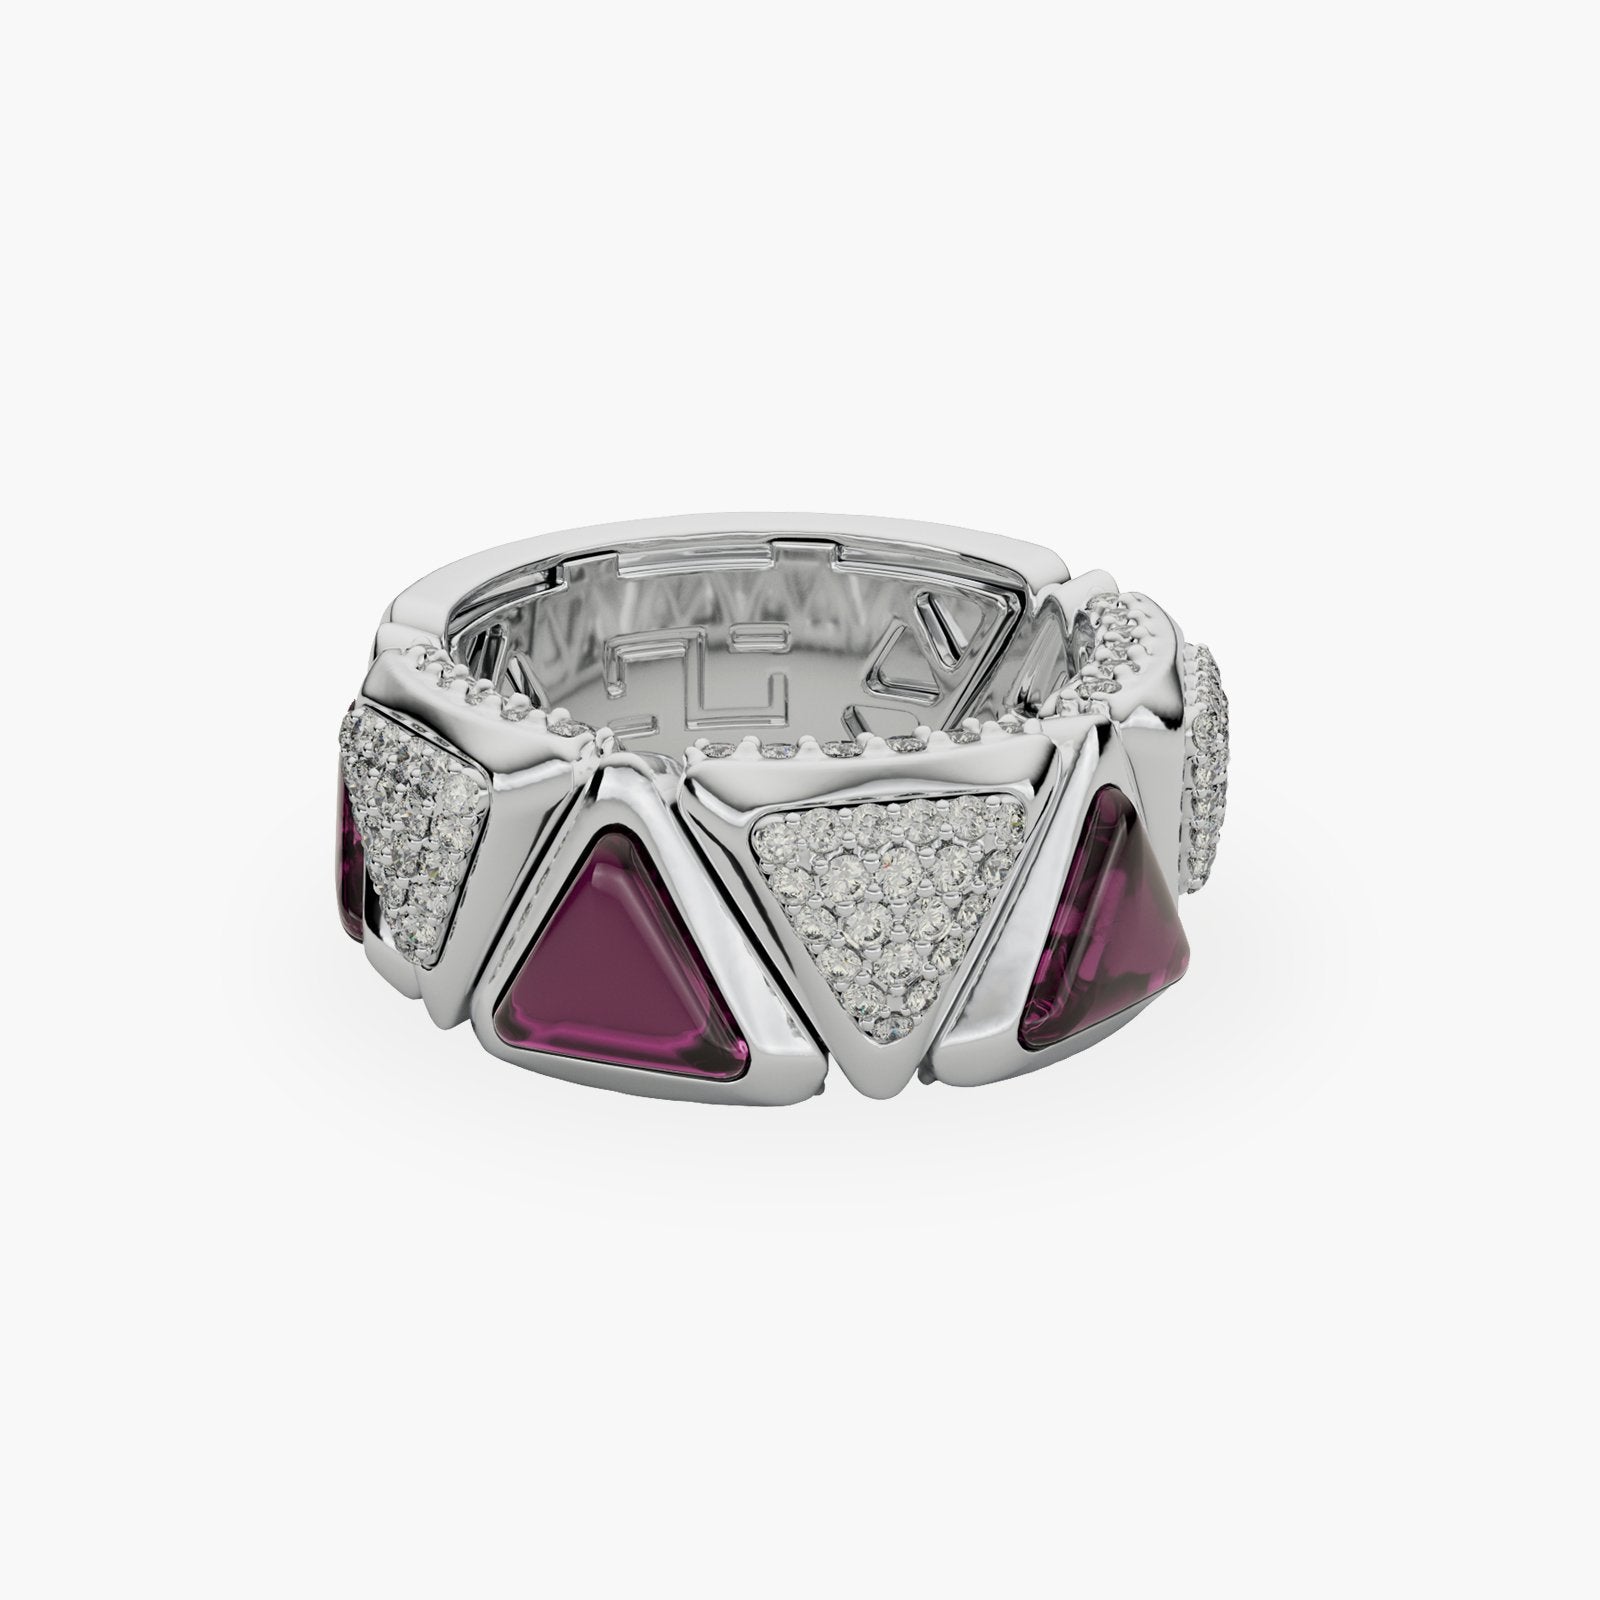 Ring Mirror Exquisite White Gold Pink Garnet and Diamonds